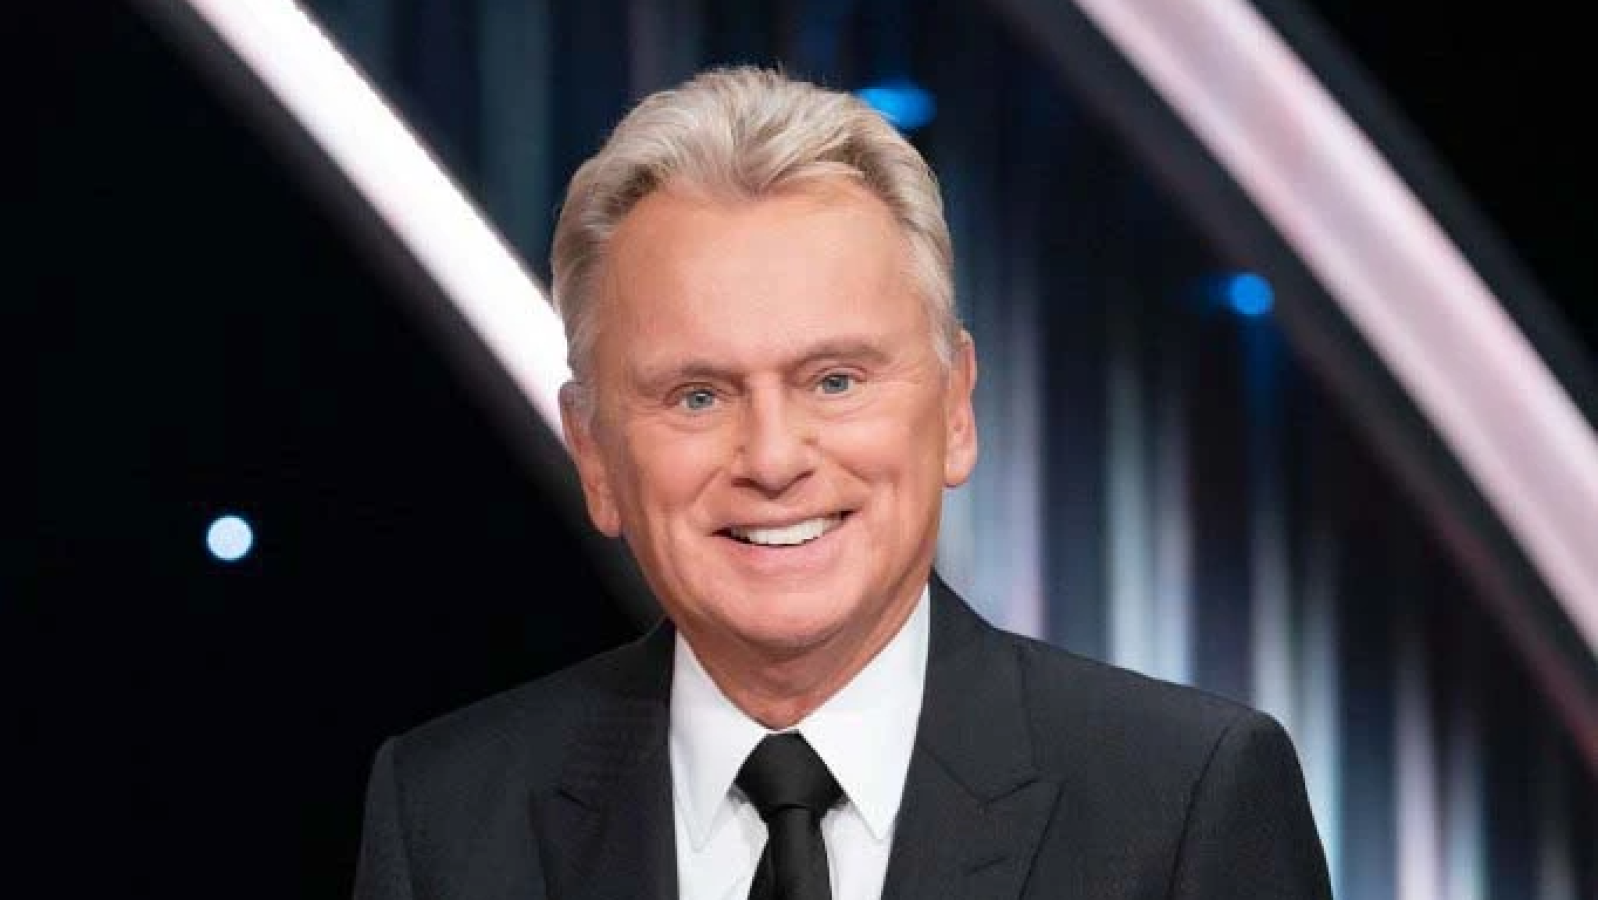 Pat Sajak Says 'The End Is Near' for His 'Wheel of Fortune' Hosting Gig